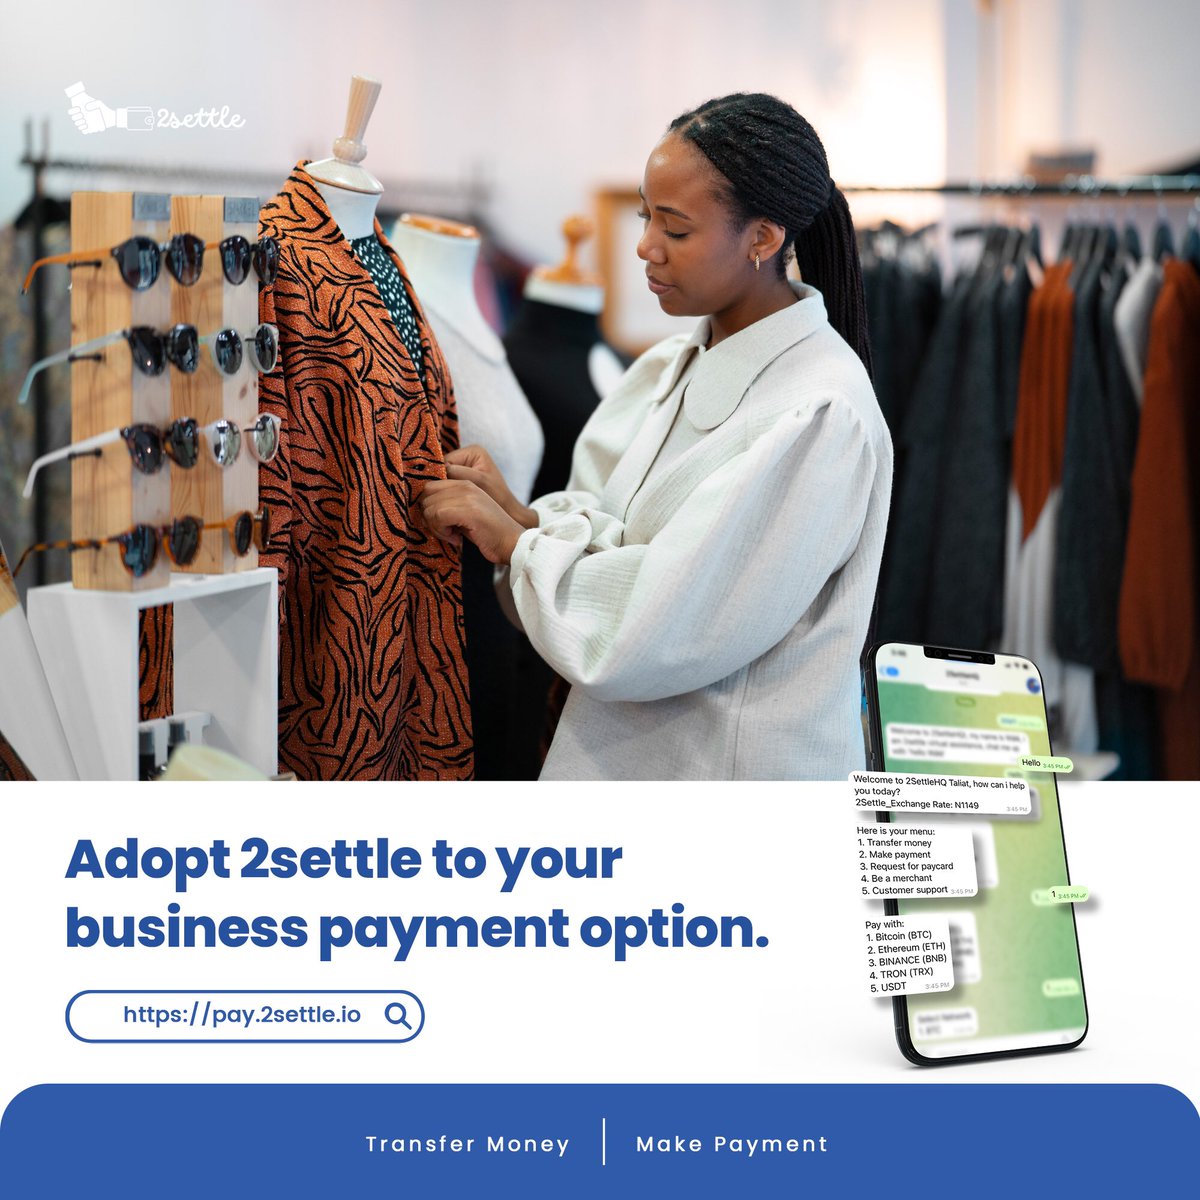 Small businesses, medium enterprises and big establishments can all use 2Settle for settling payment. Adopt 2Settle to your already existing payment options today, this time with a difference of paying with #btc #ETH #TRX #USDT #BNB Chat wale now @SettleHQ_bot to get started.